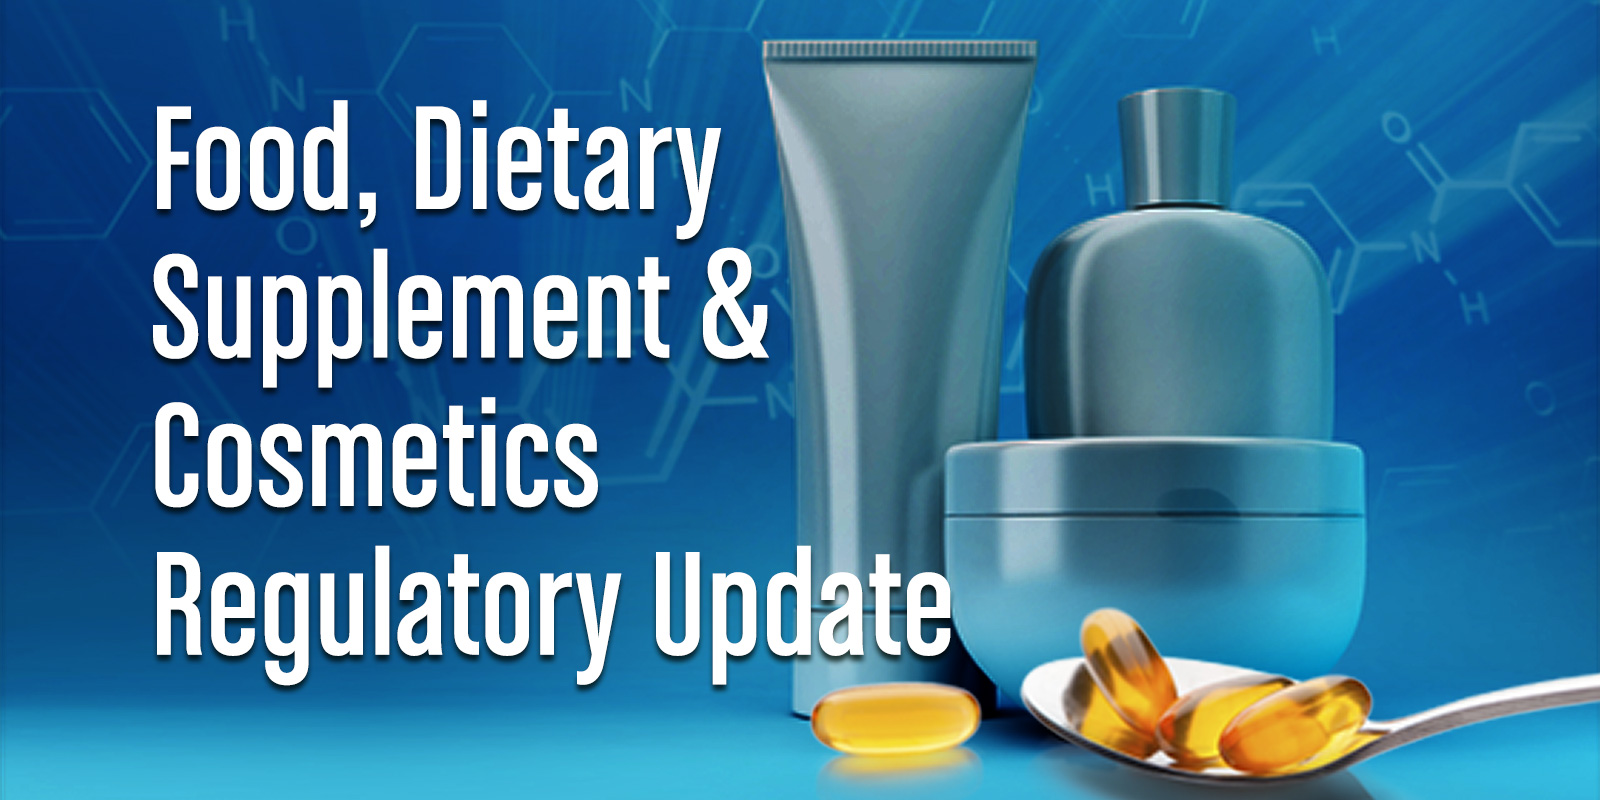 Food, Dietary Supplement & Cosmetics Update | Vol. IV, Issue 6